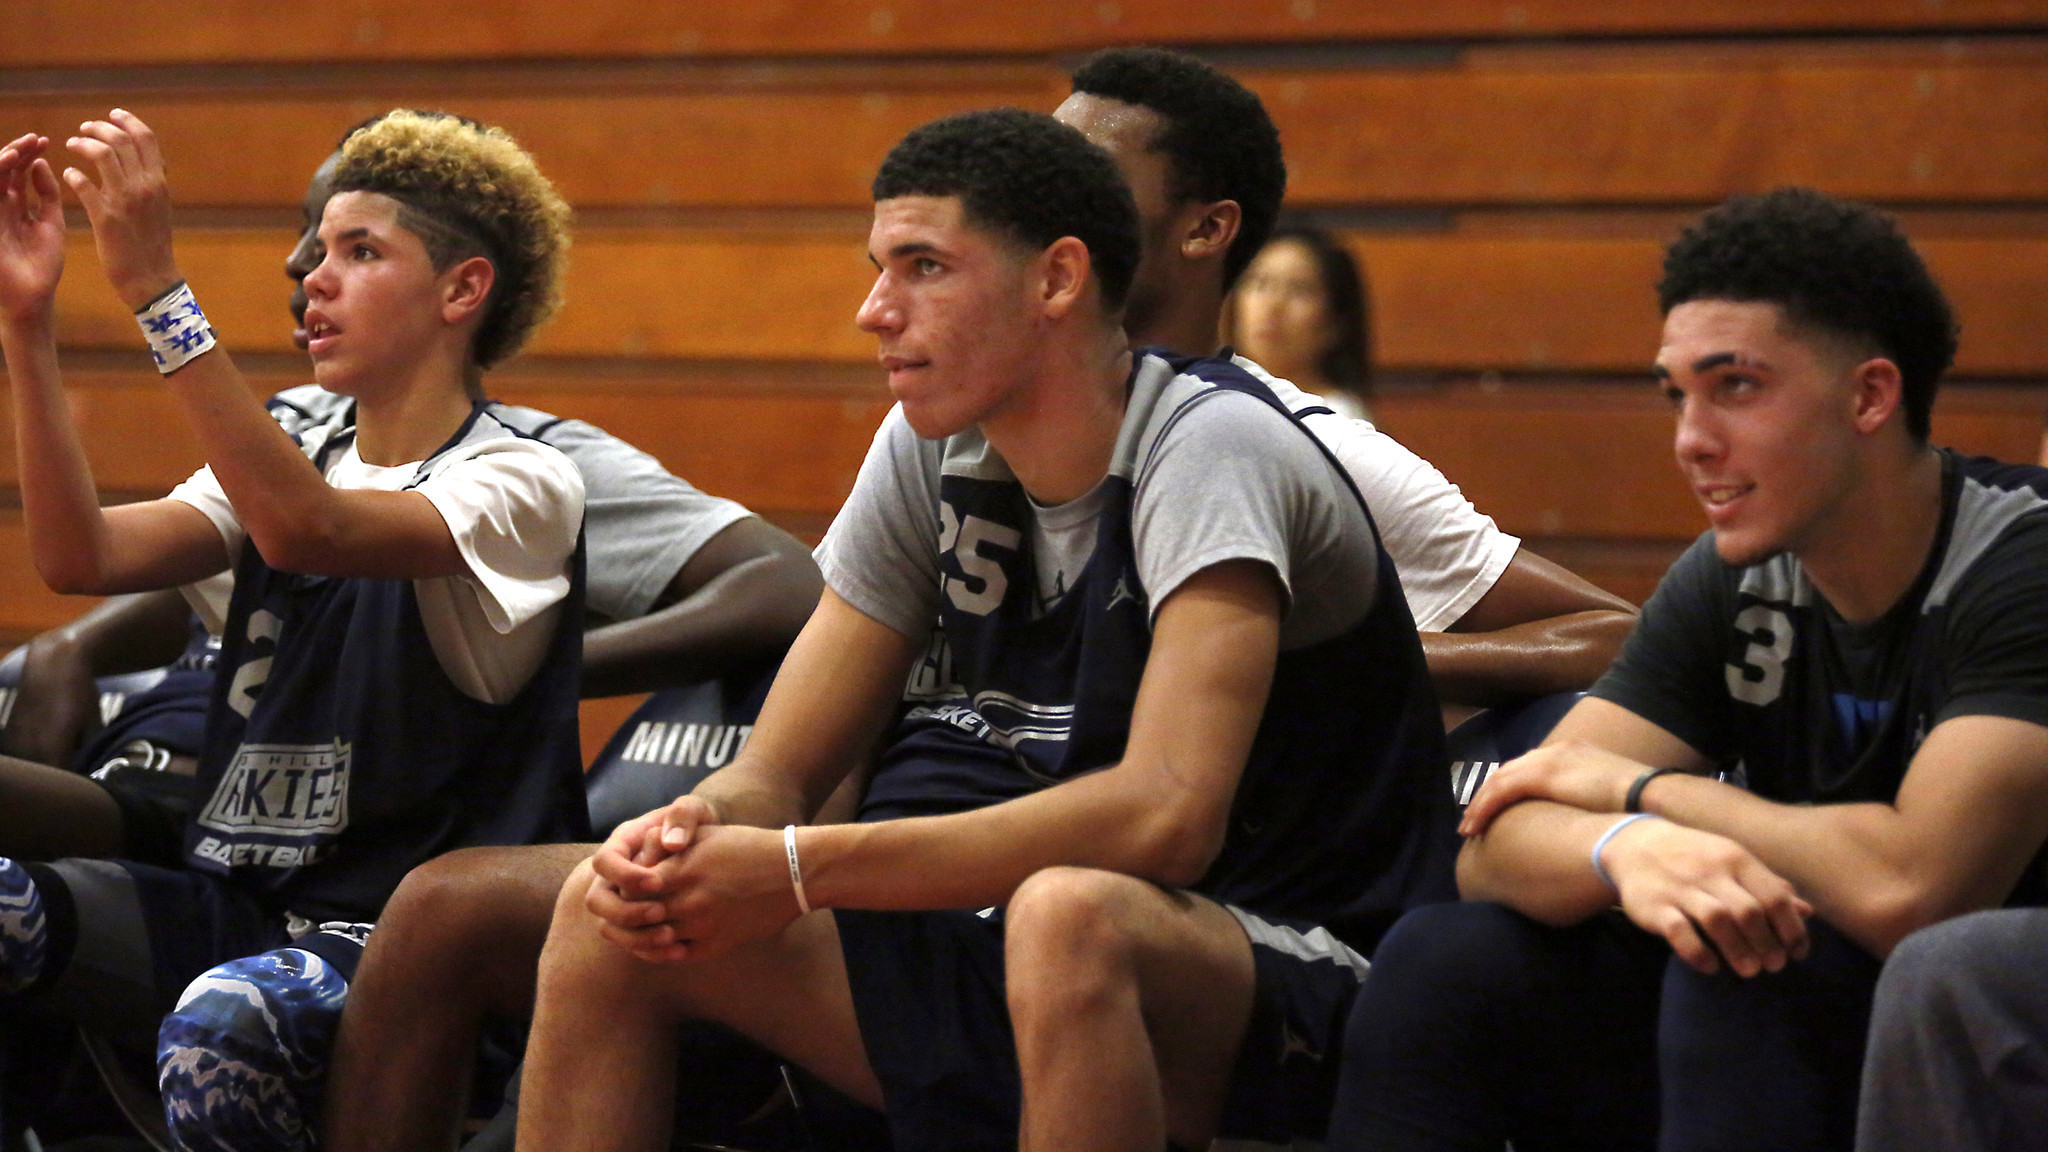 A band of brothers named Ball makes Chino Hills a basketball contender - LA Times2048 x 1152